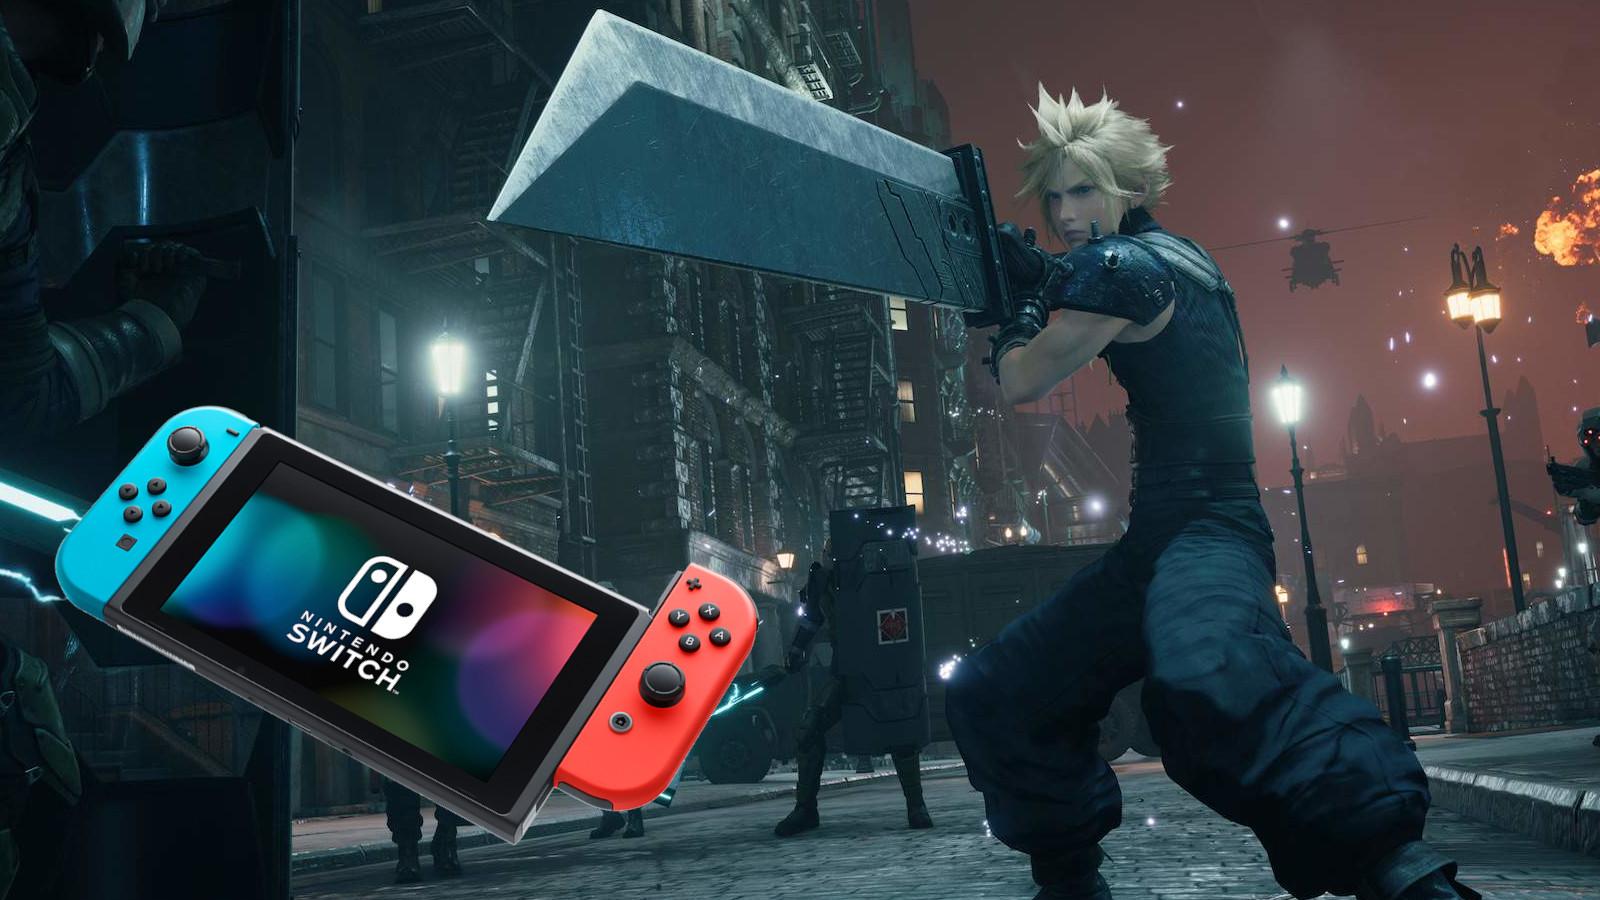 Switch 2 leaks claim console runs “like a PS5”, FF7R to be launch title &  more - Dexerto